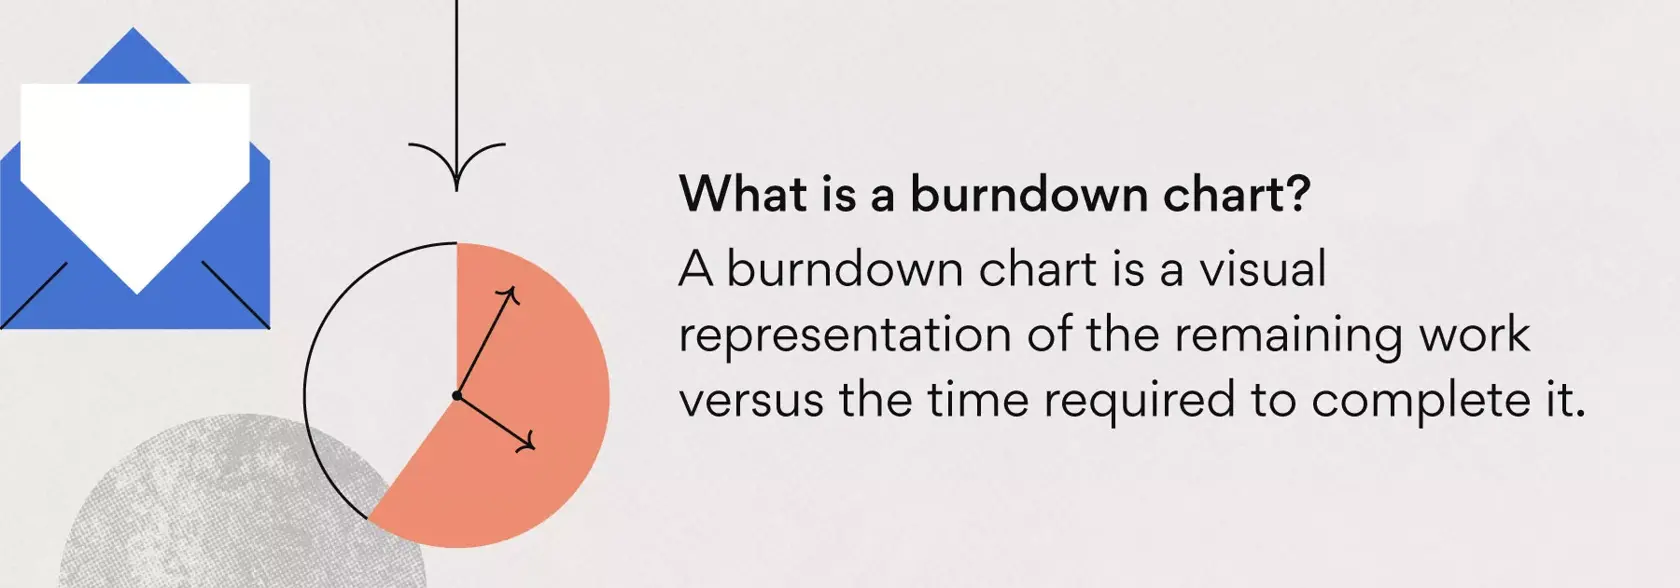 [inline illustration] what is a burndown chart (infographic)